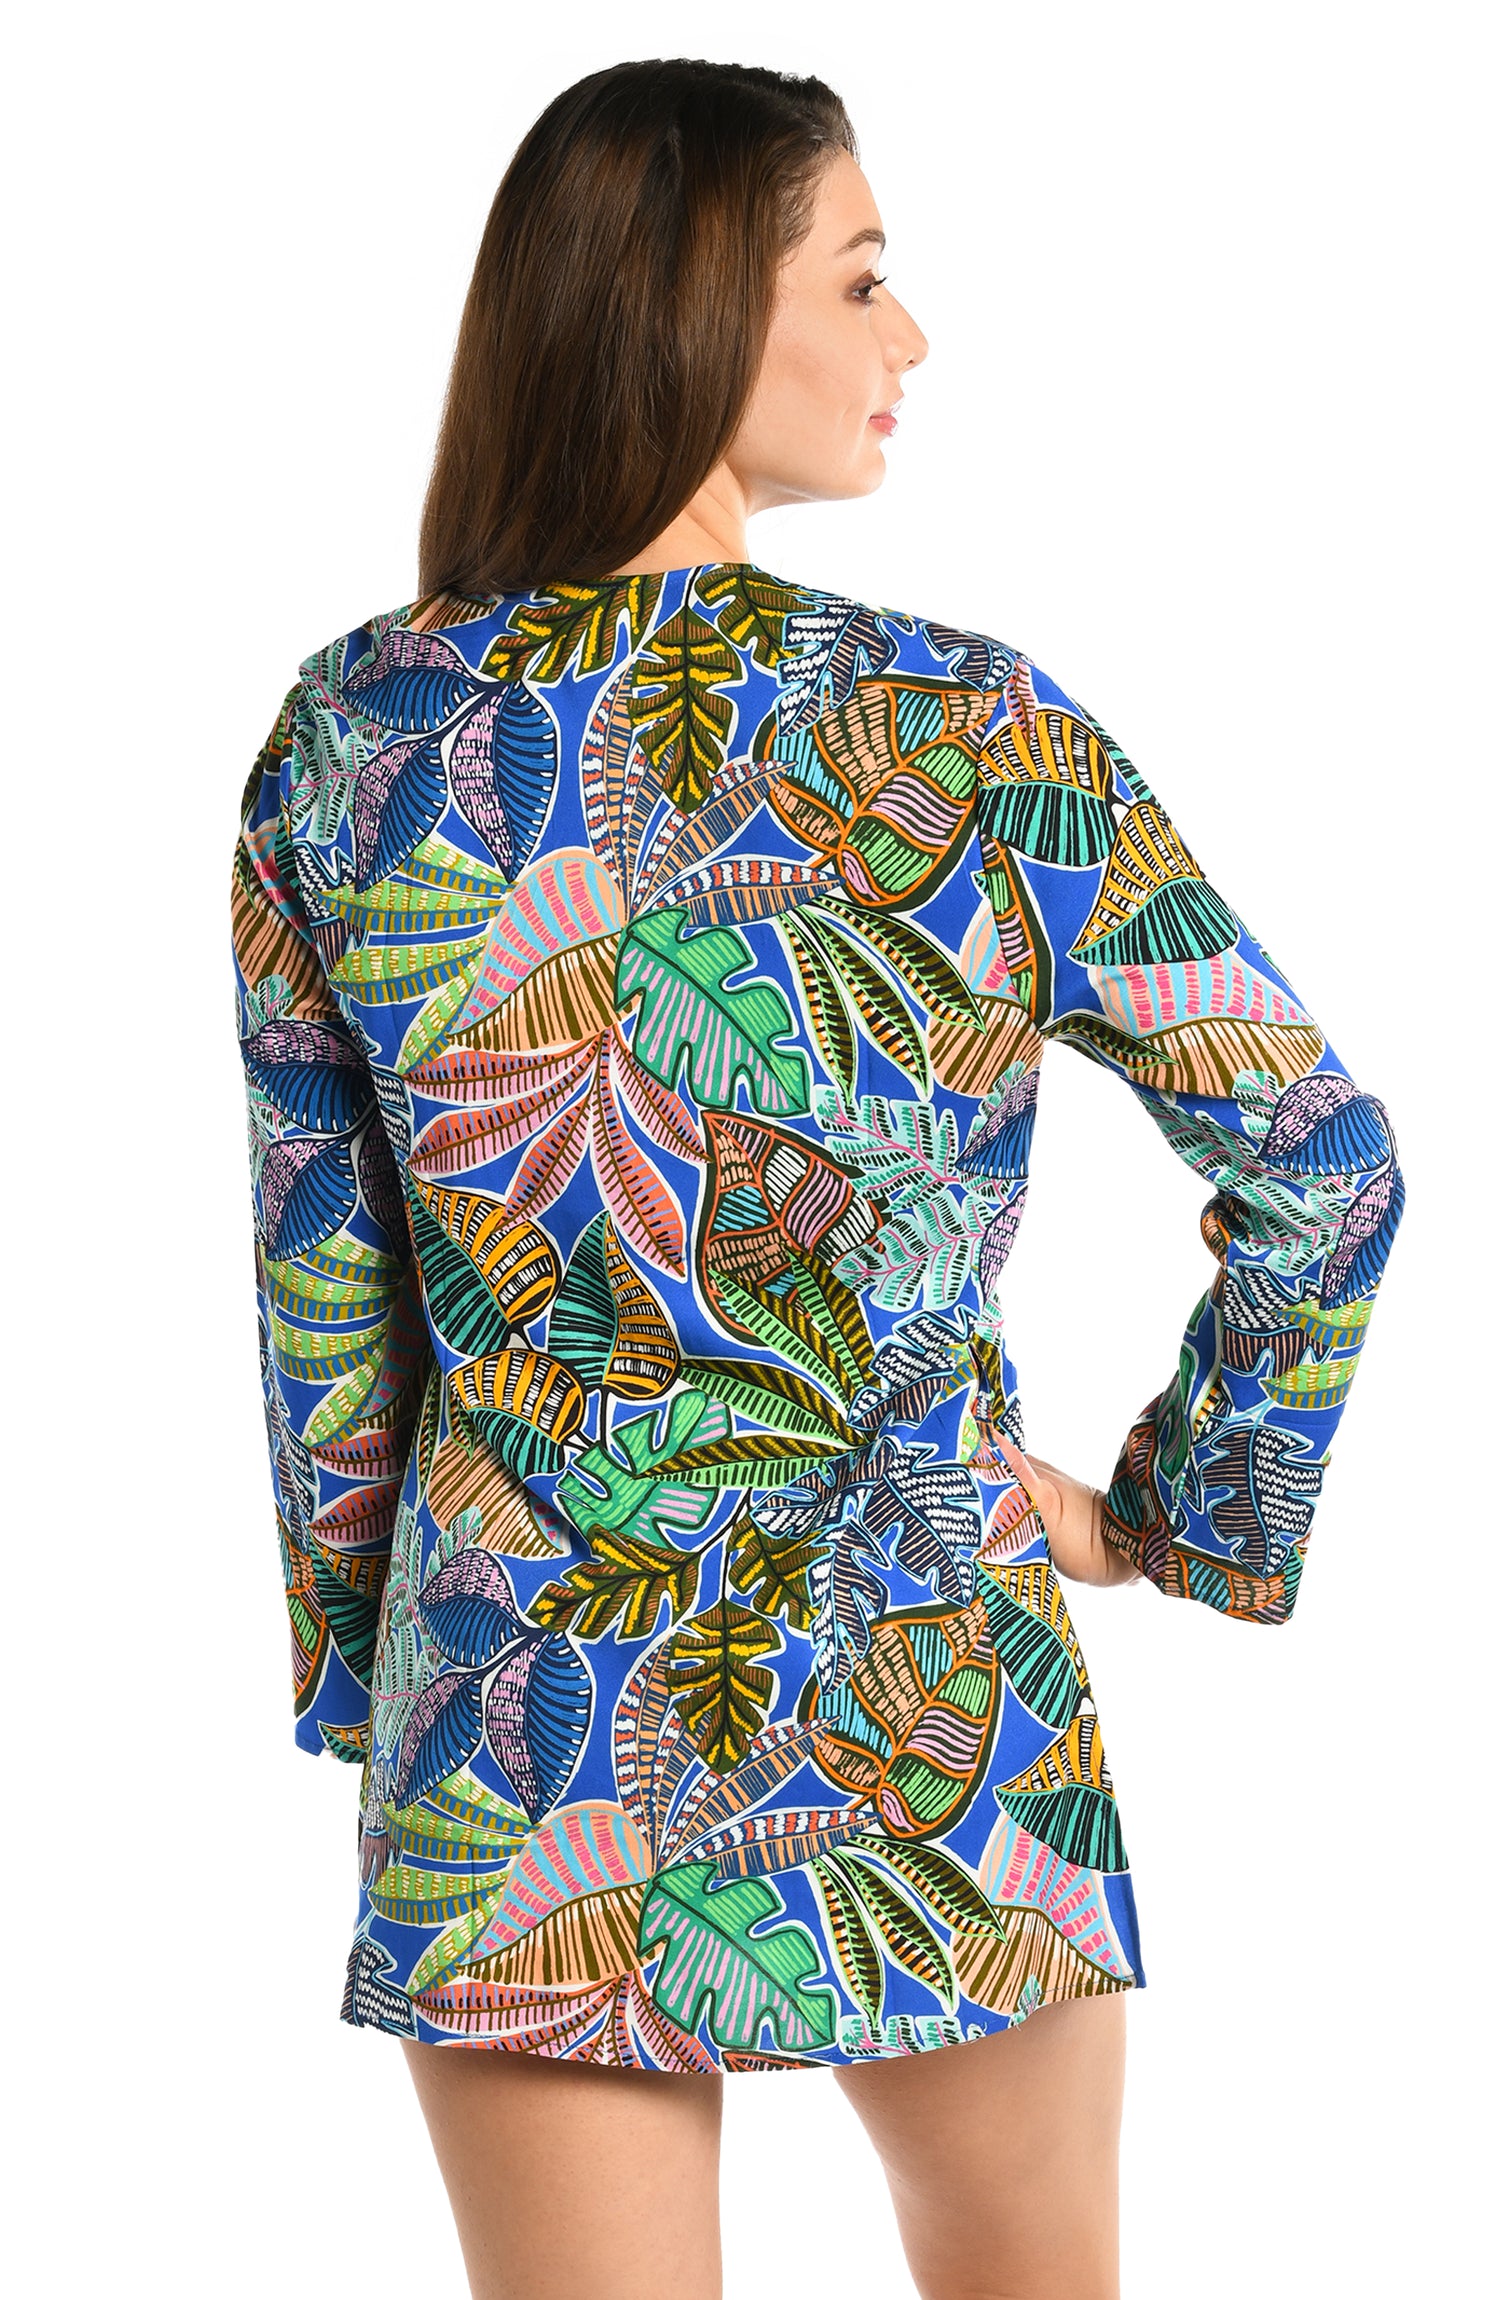 Model is wearing a neon colored printed tunic cover up from our Neon Nights collection!